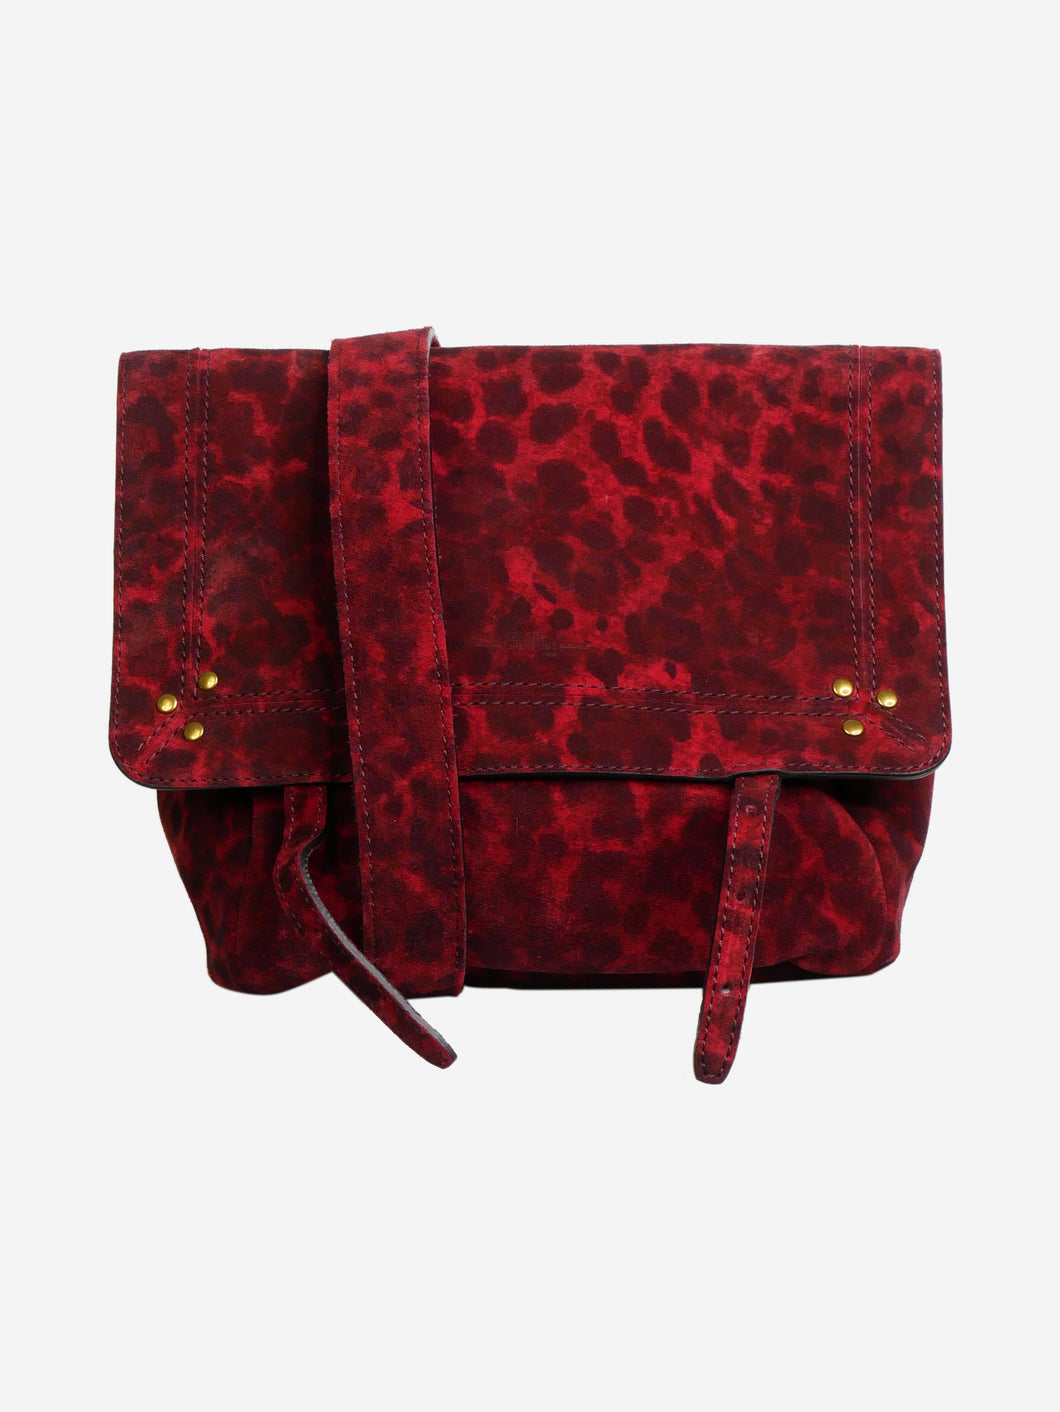 Red suede leopard print cross-body bag with gold hardware Cross-body bags Jerome Dreyfuss 